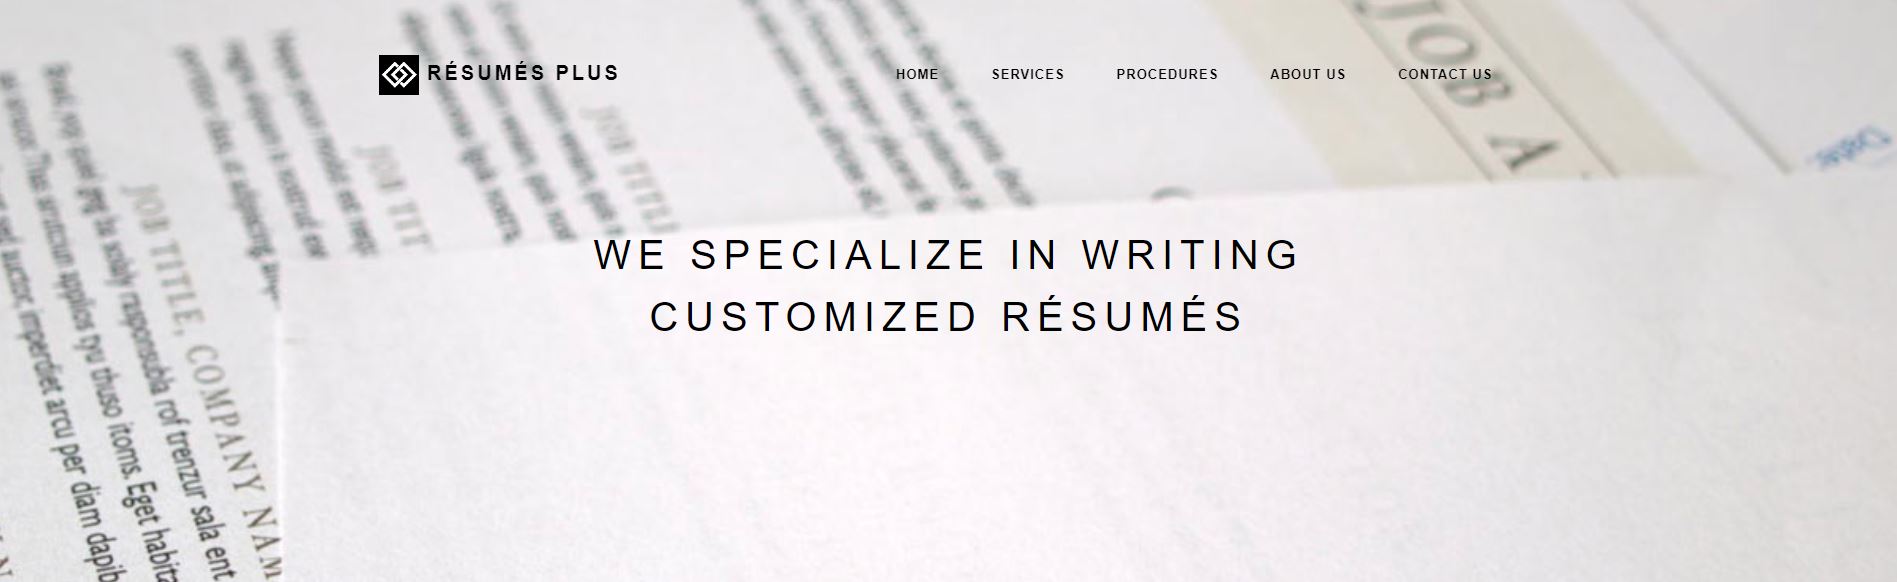 resume plus best resume writing services in worcester